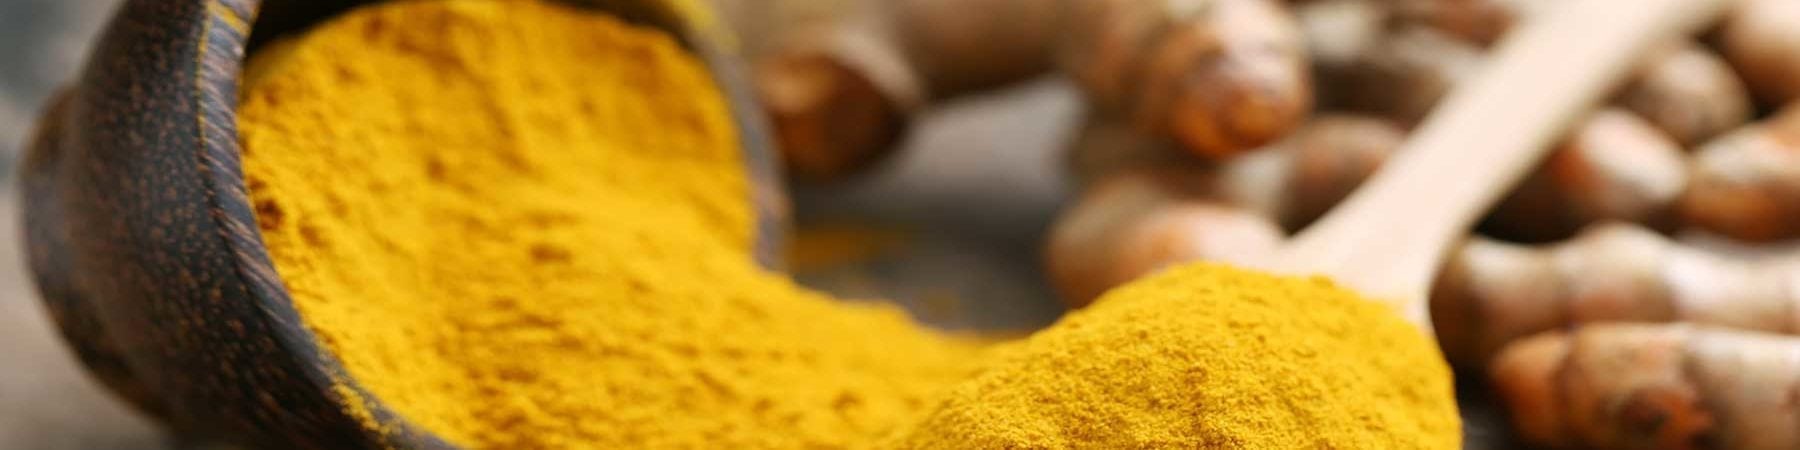 Turmeric Benefits for Inflammation and Cellular Health